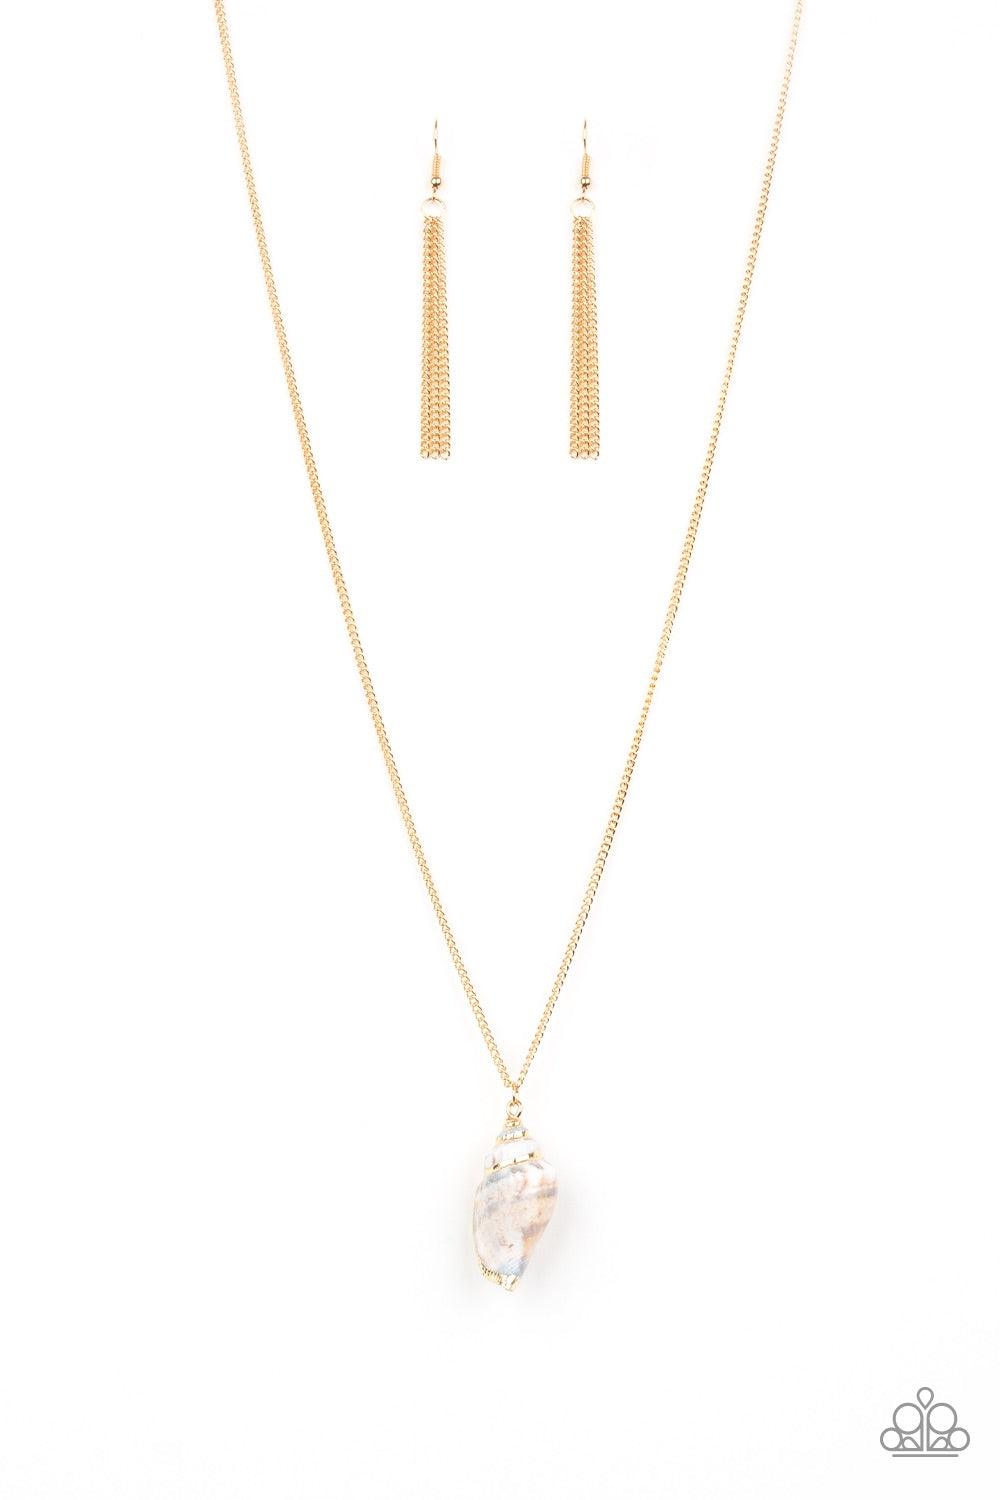 Paparazzi Accessories Breaking Out Of My Shell - Gold Bordered in a glistening gold finish, an iridescent seashell swings from the bottom of a lengthened gold chain for a summery flair. Features an adjustable clasp closure. Jewelry